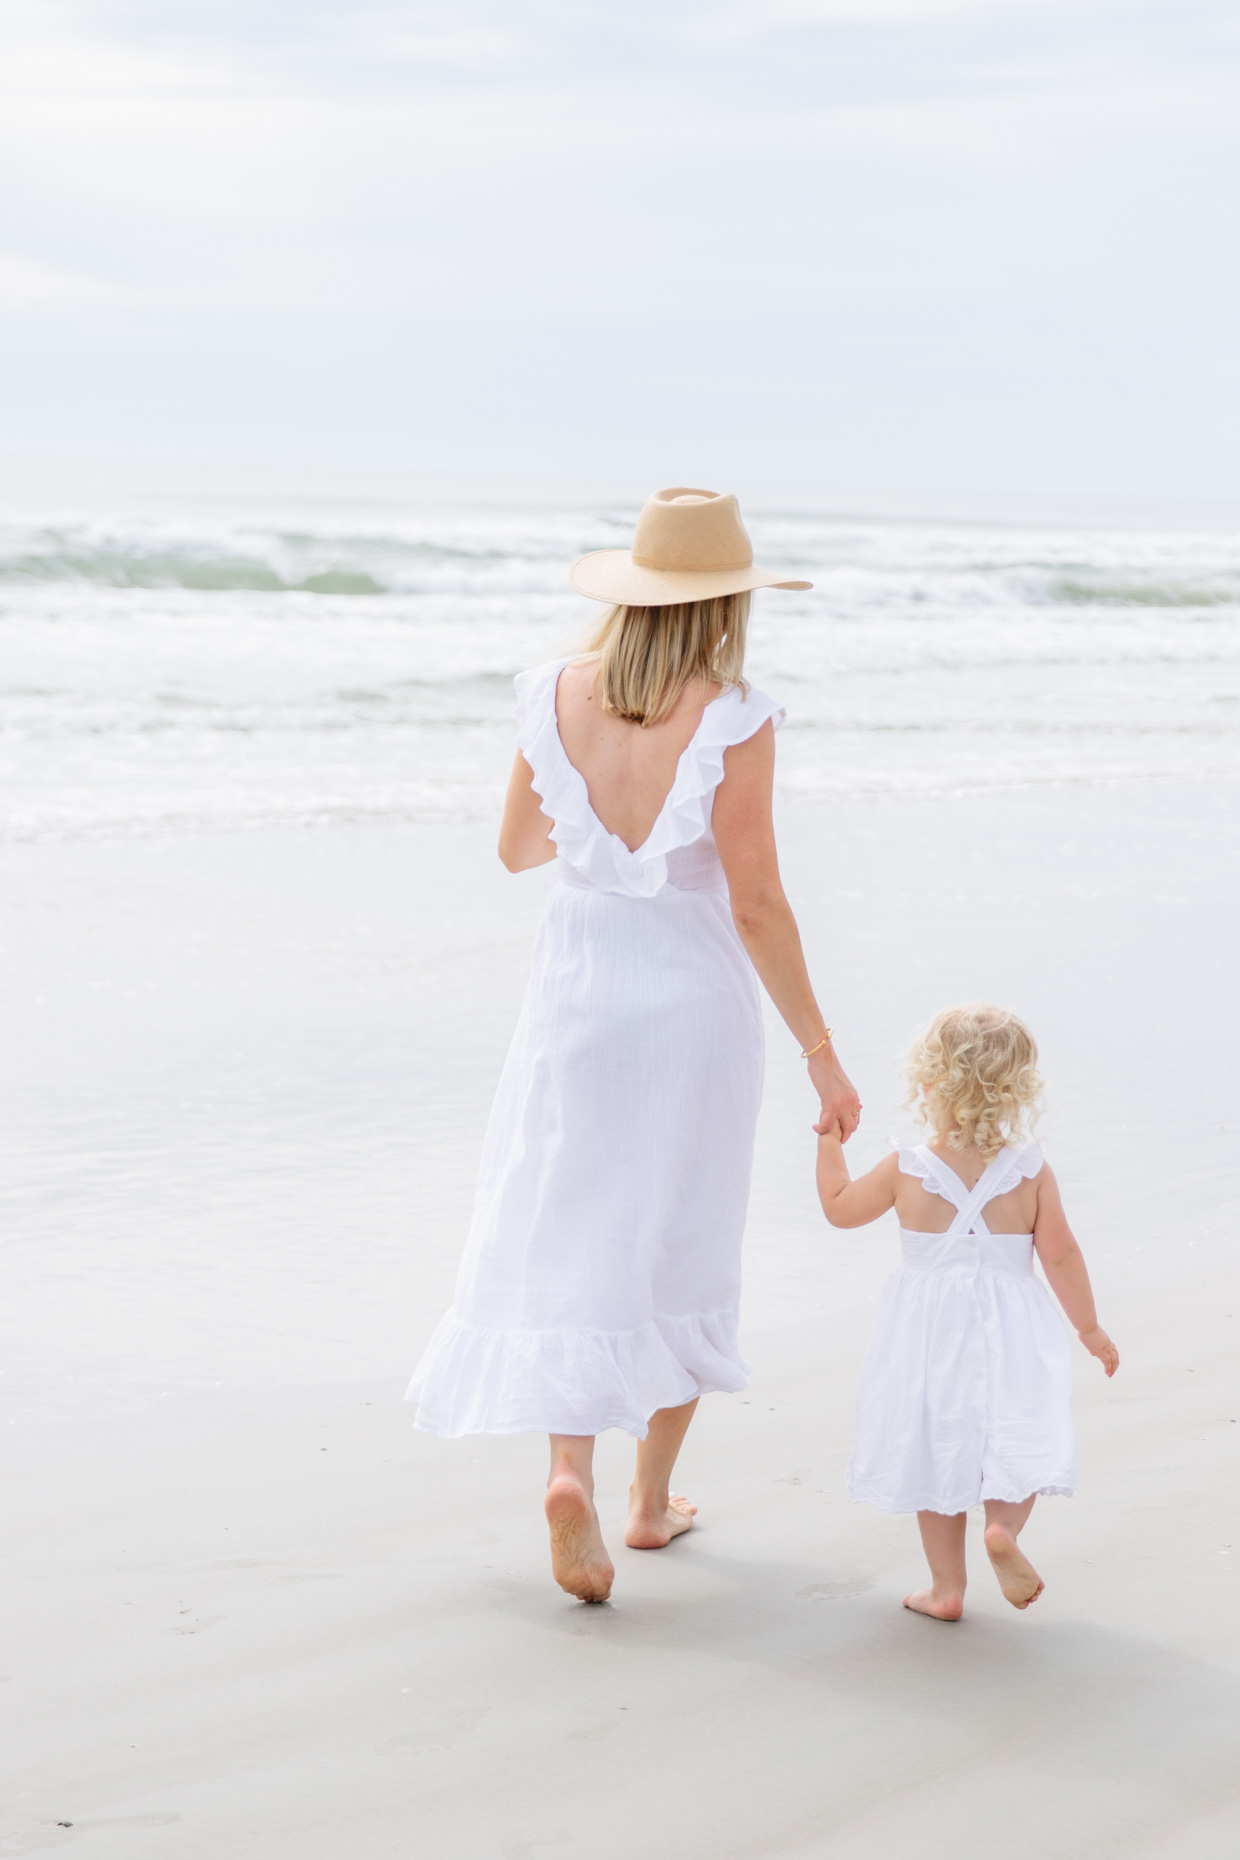 Mommy and Me white ruffled dresses for the beach, Mommy and me matching outfit idea for beach photos